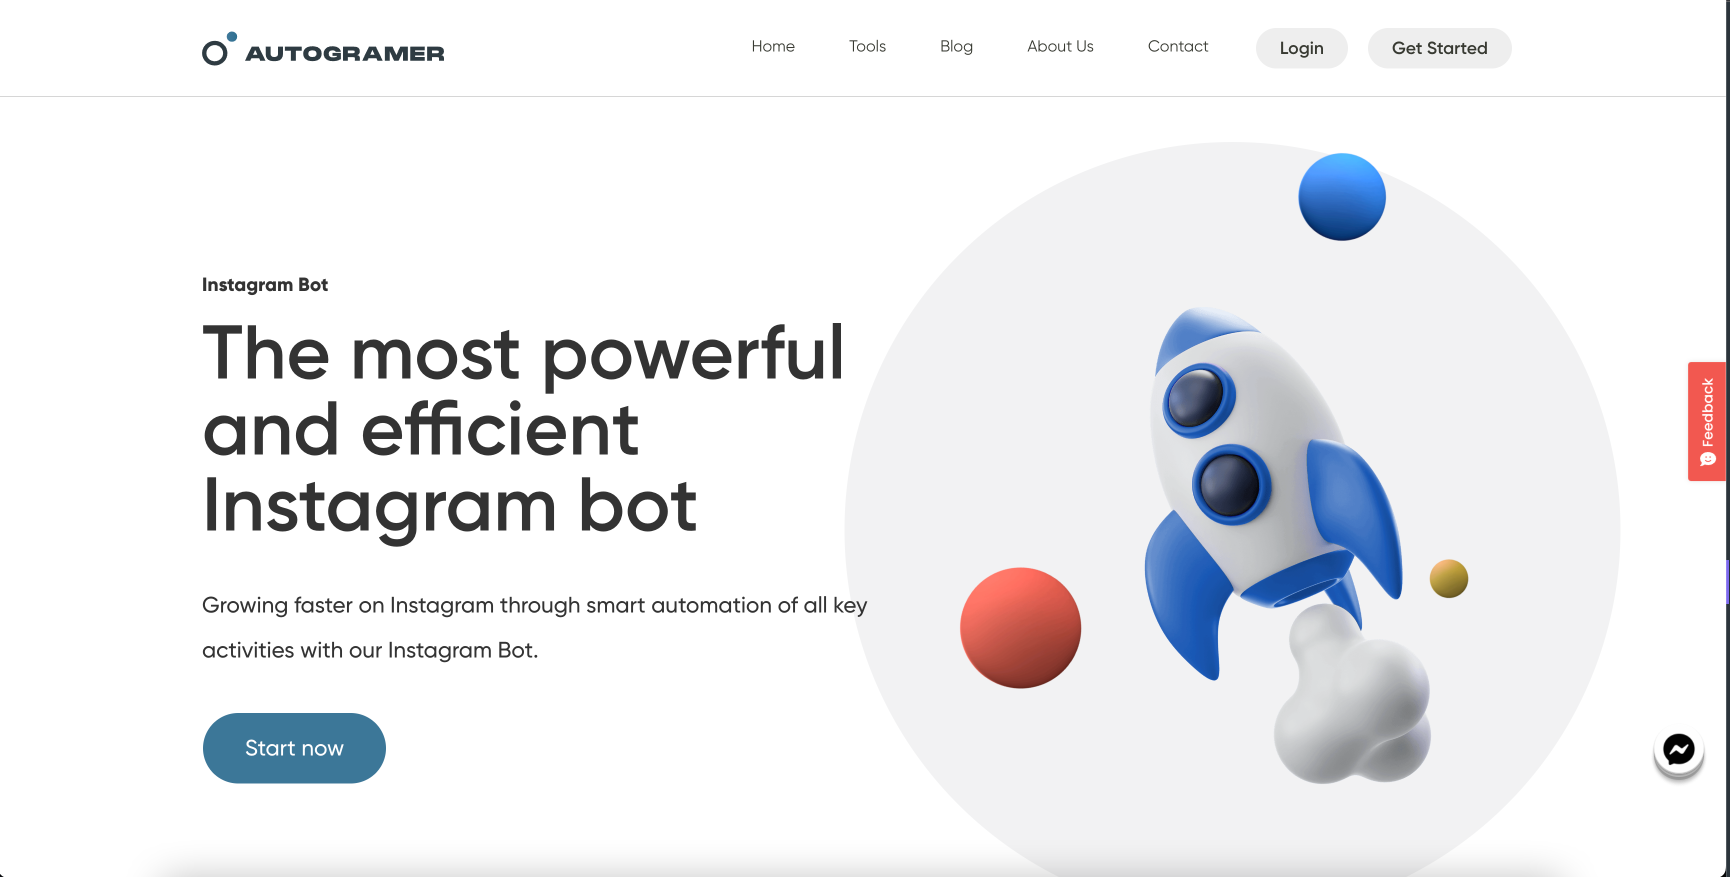 Instagrambot - one of the TOP 7 Instagram bots for Like & Follow engagement.